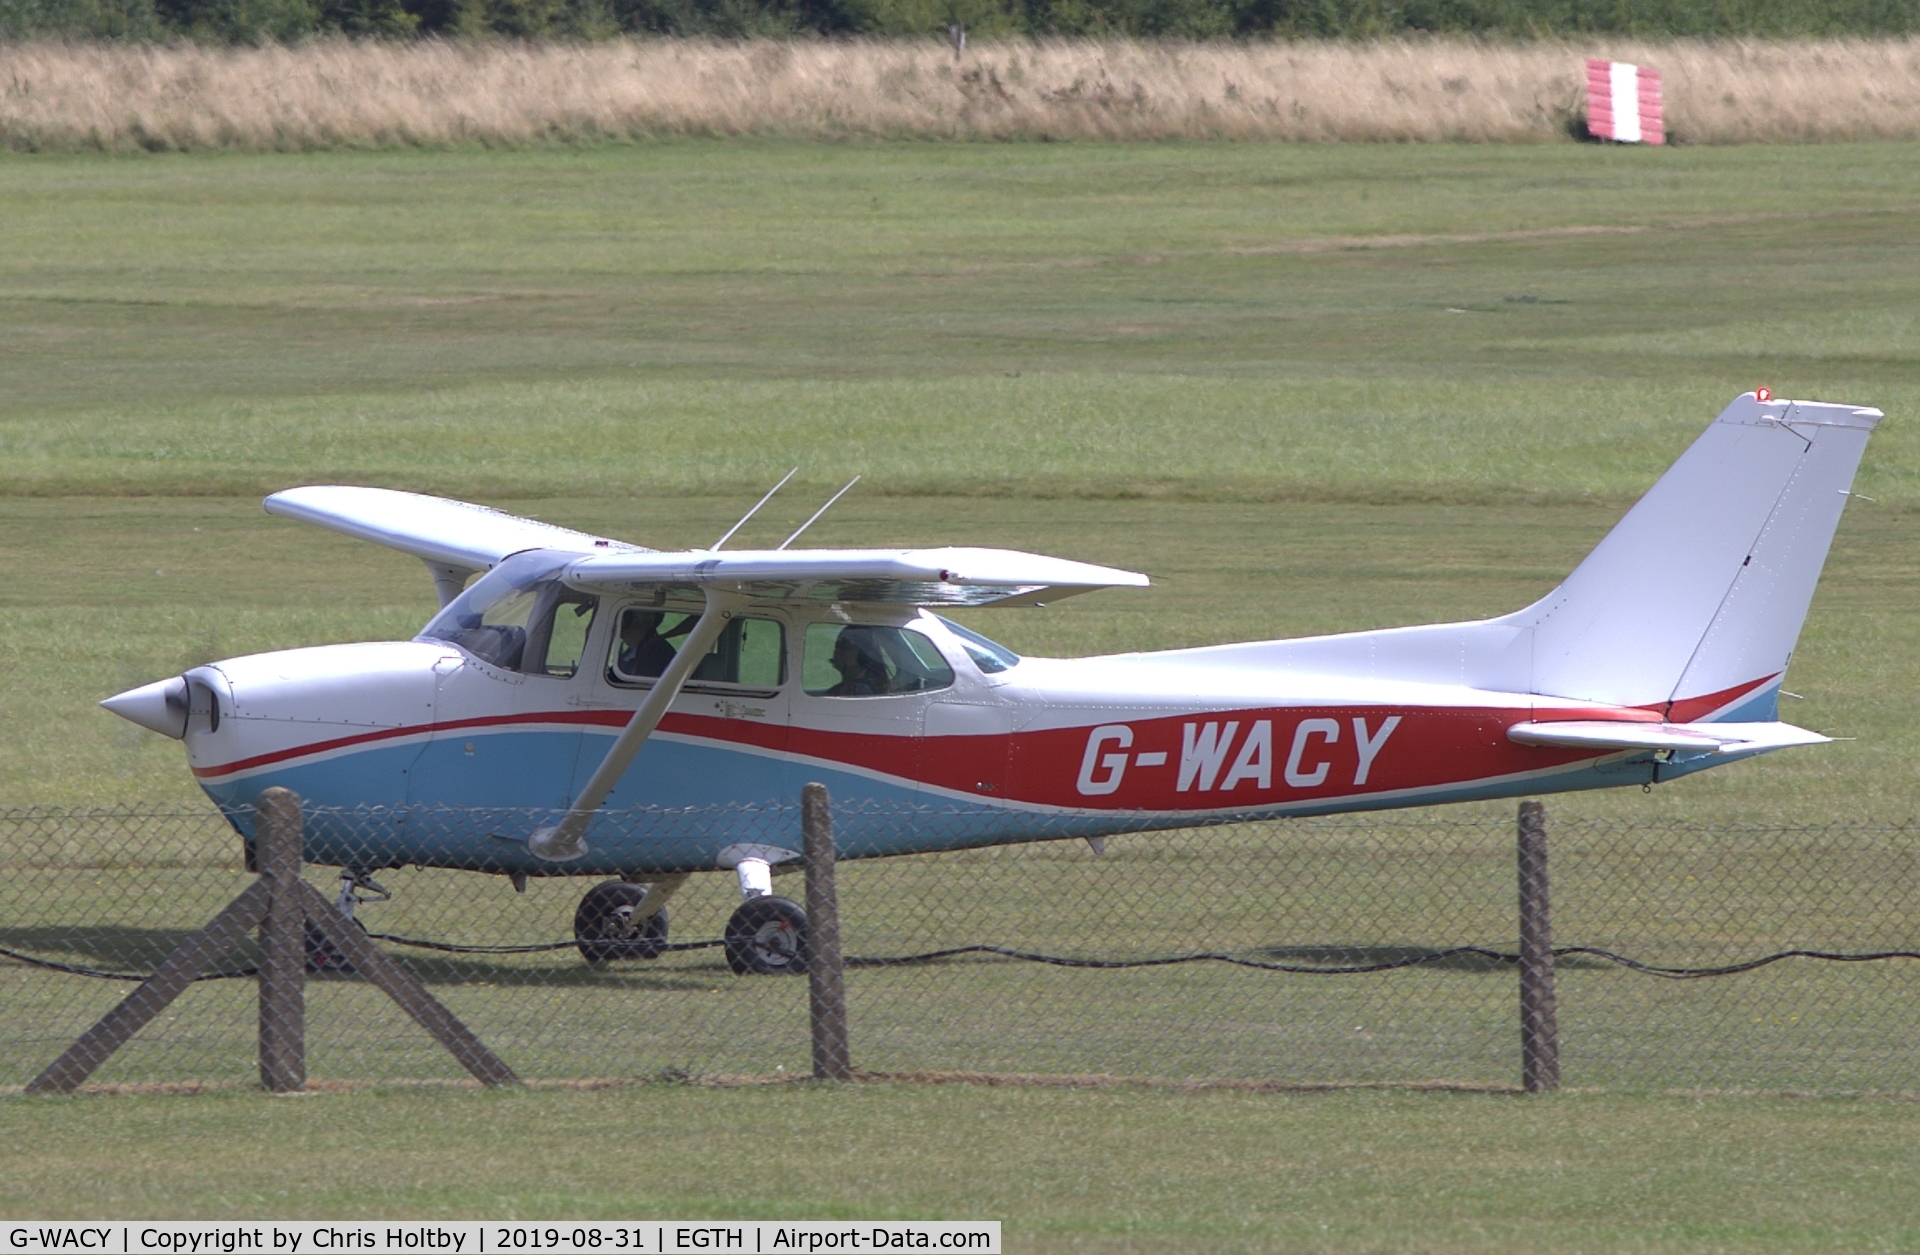 G-WACY, 1984 Reims F172P Skyhawk C/N 2217, Just arrived at Old Warden